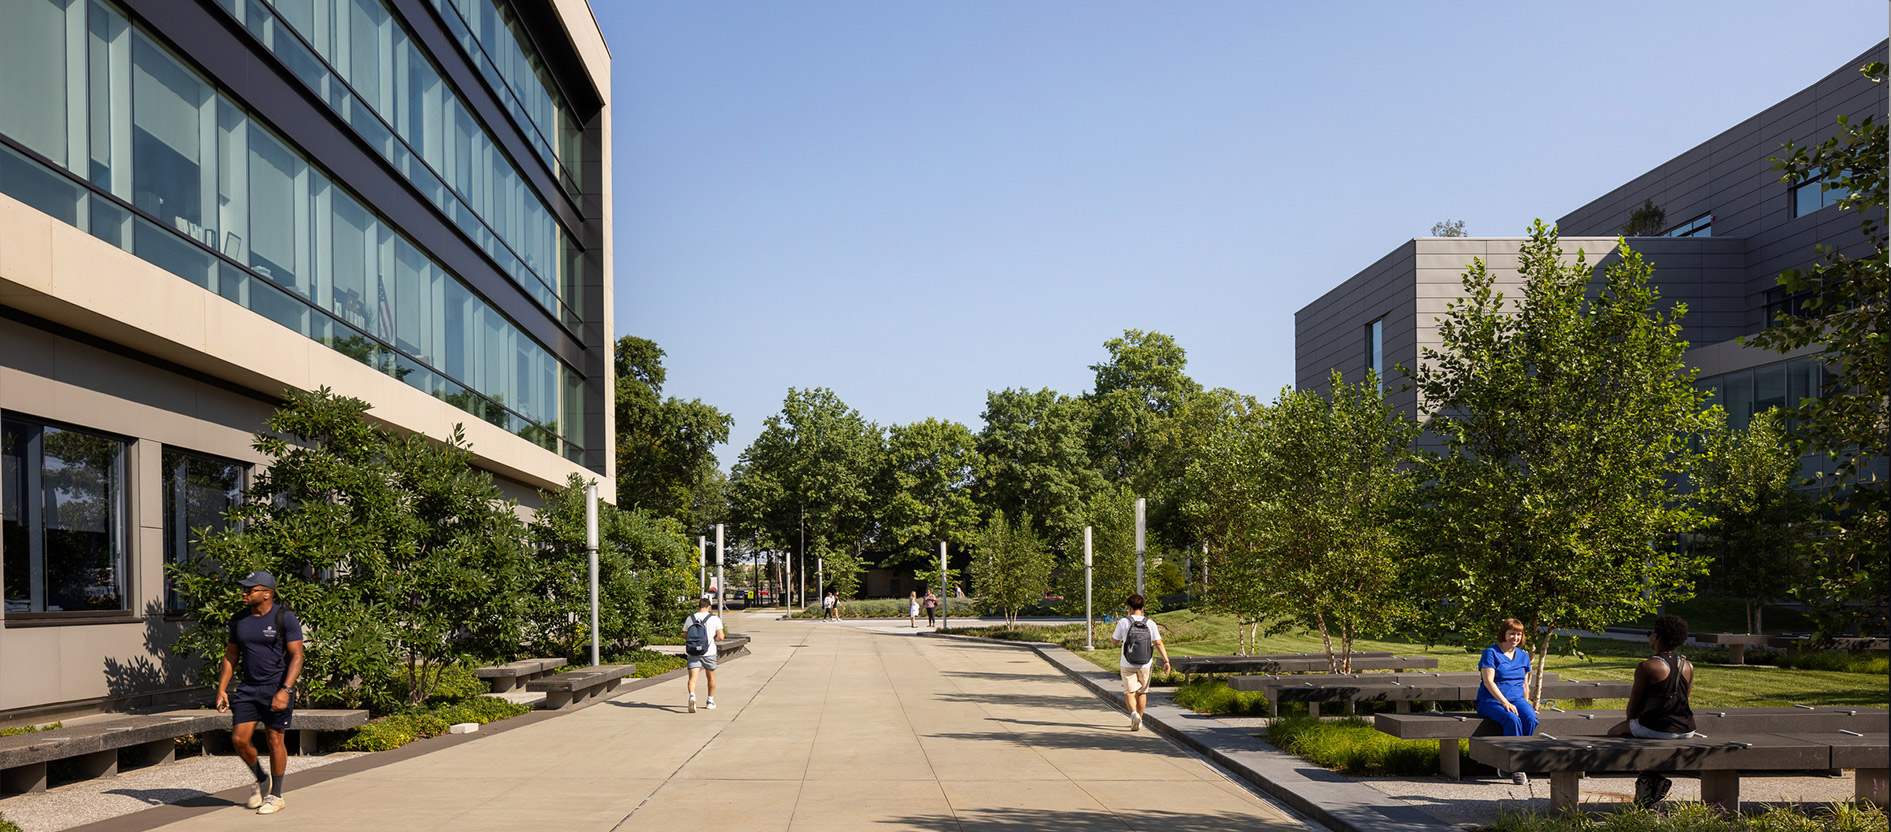 Pedestrians walking along a pathway flanked by modern buildings and green landscaping on a sunny day.